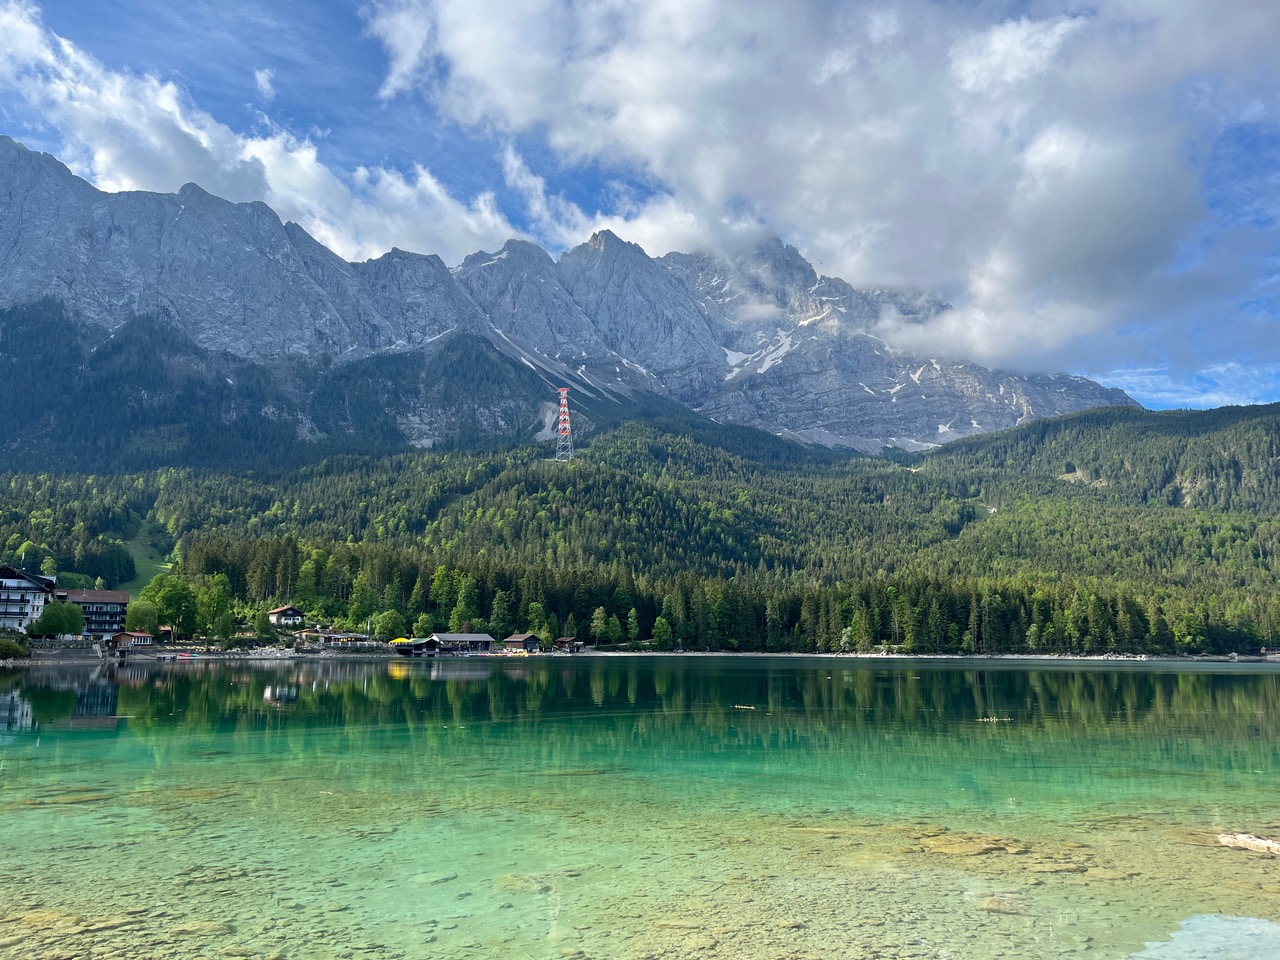 Lake Eibsee with the Zugspitze in the background